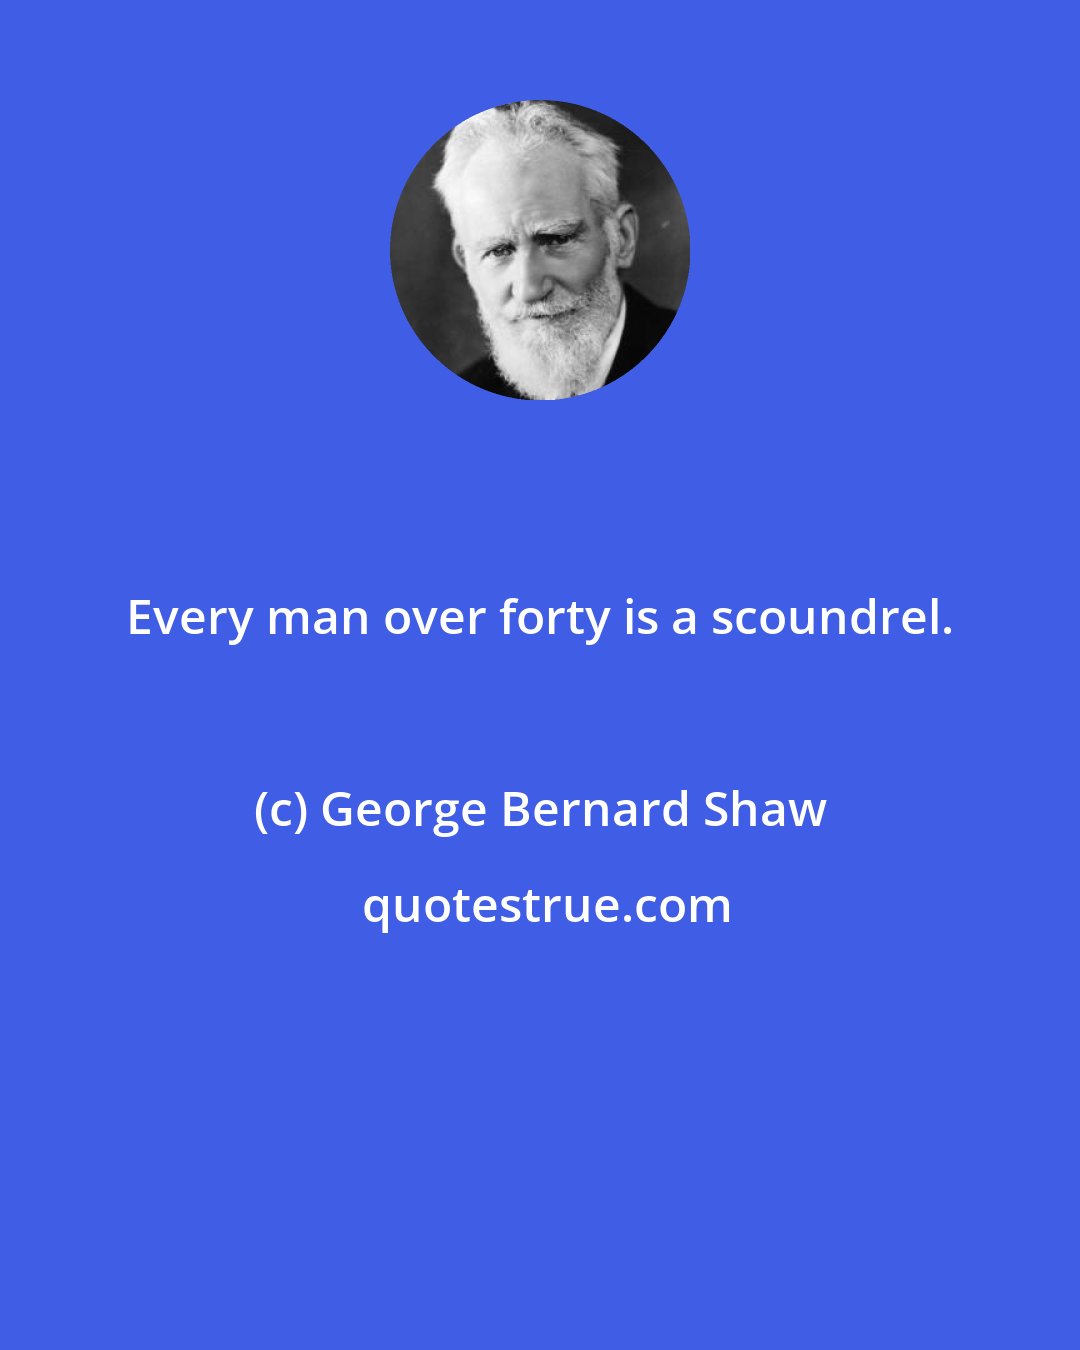 George Bernard Shaw: Every man over forty is a scoundrel.